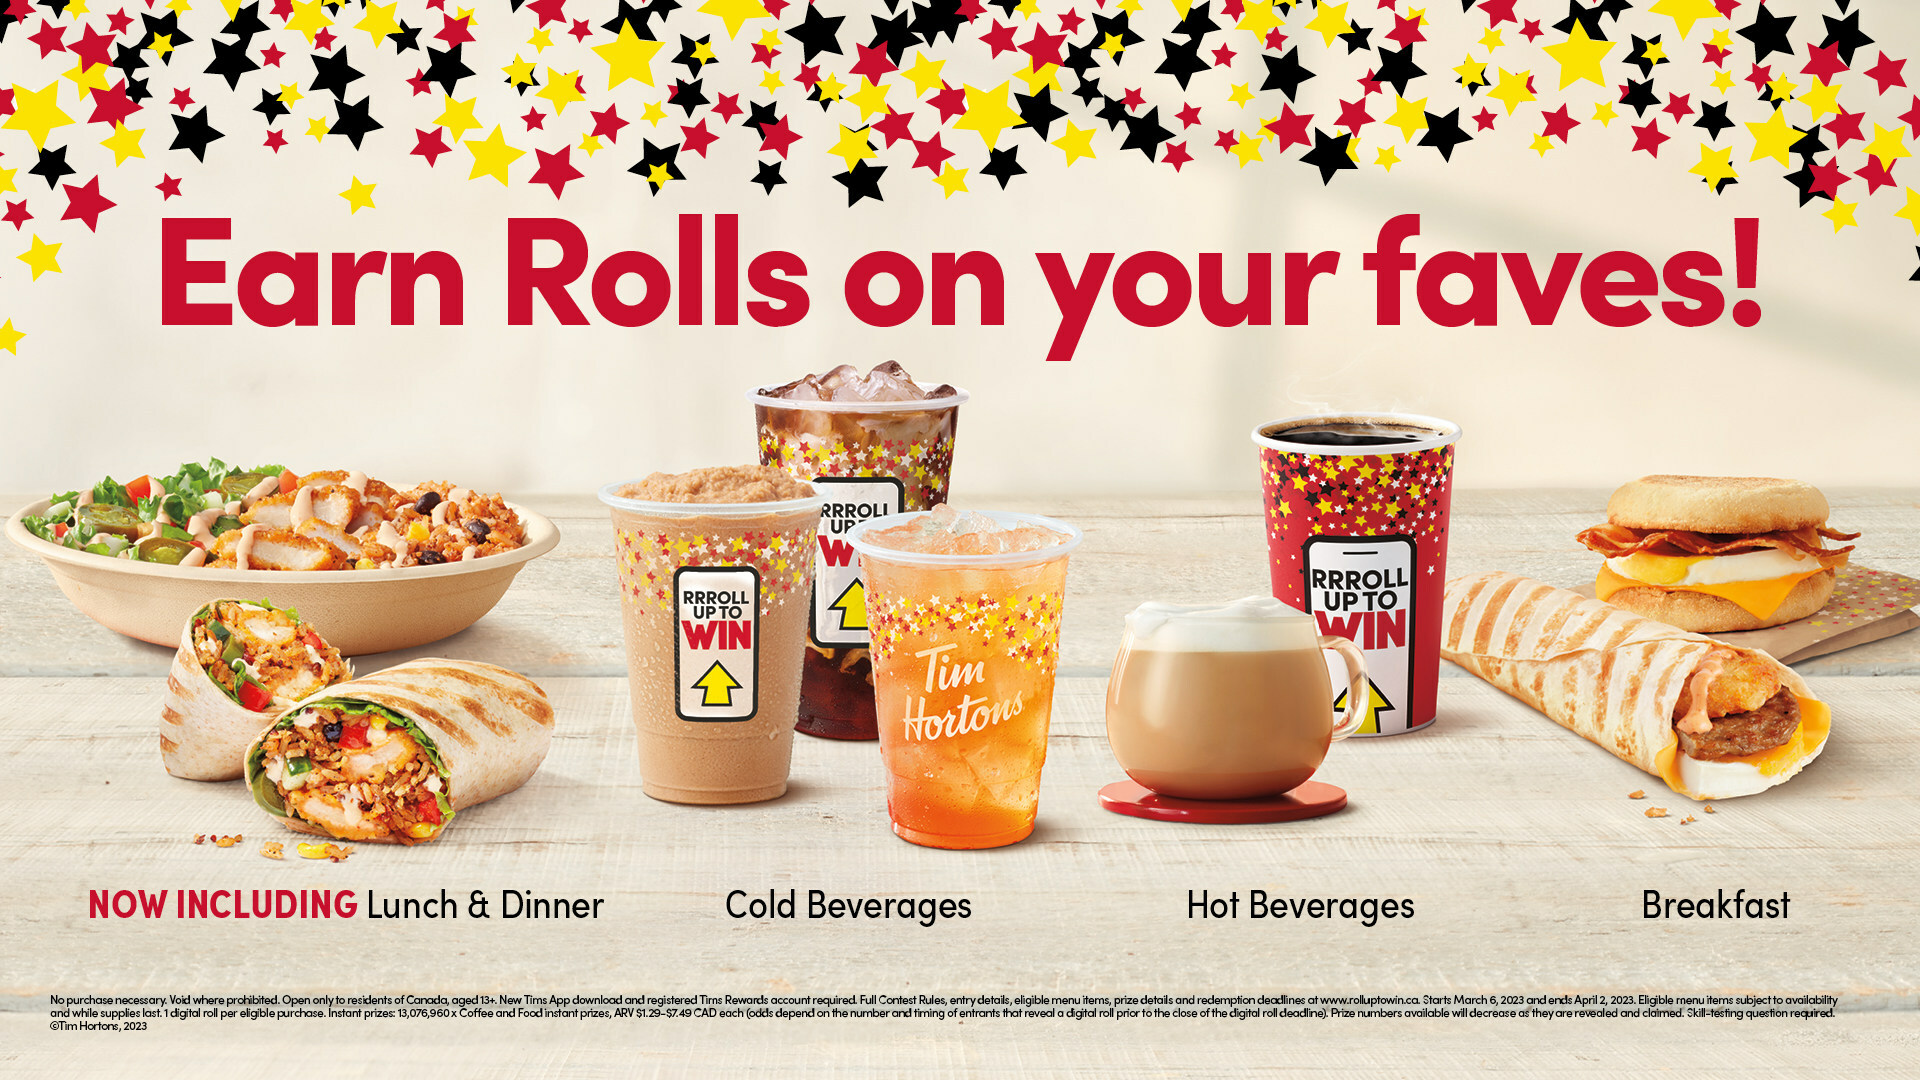 Tim Hortons Iconic Roll Up To Win Contest is BACK and Starts March 6